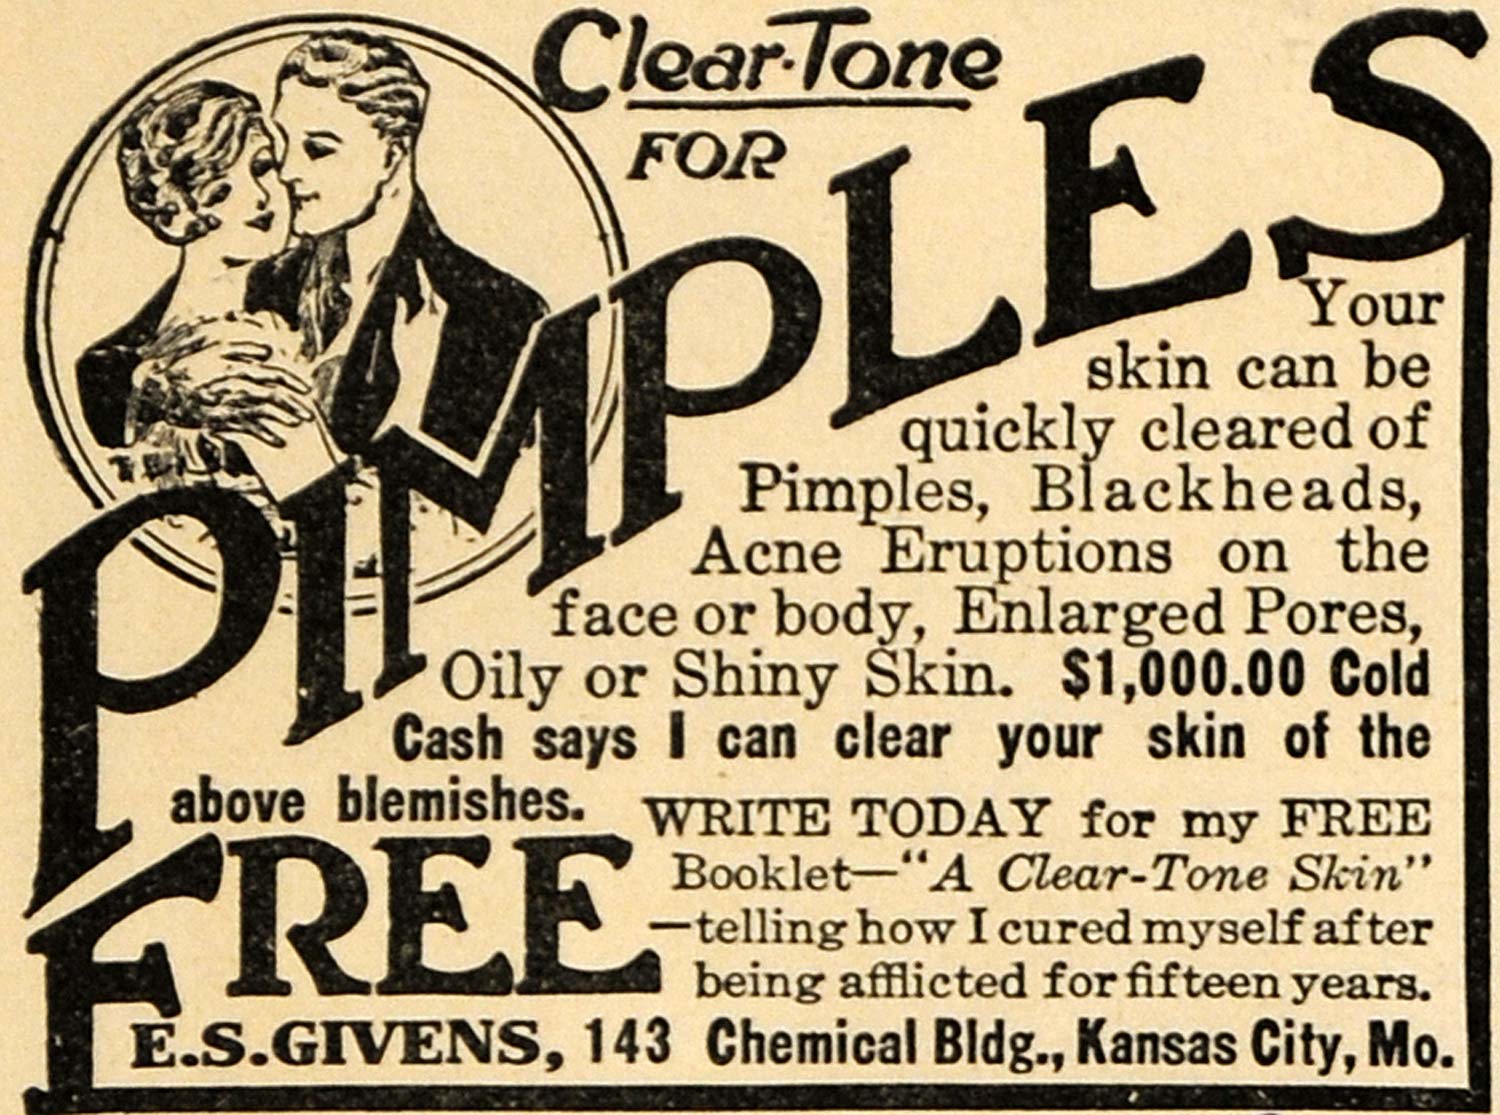 1923 Ad E. S. Givens Pimple Clear Complexion Formula - ORIGINAL ADVERTISING ILW1